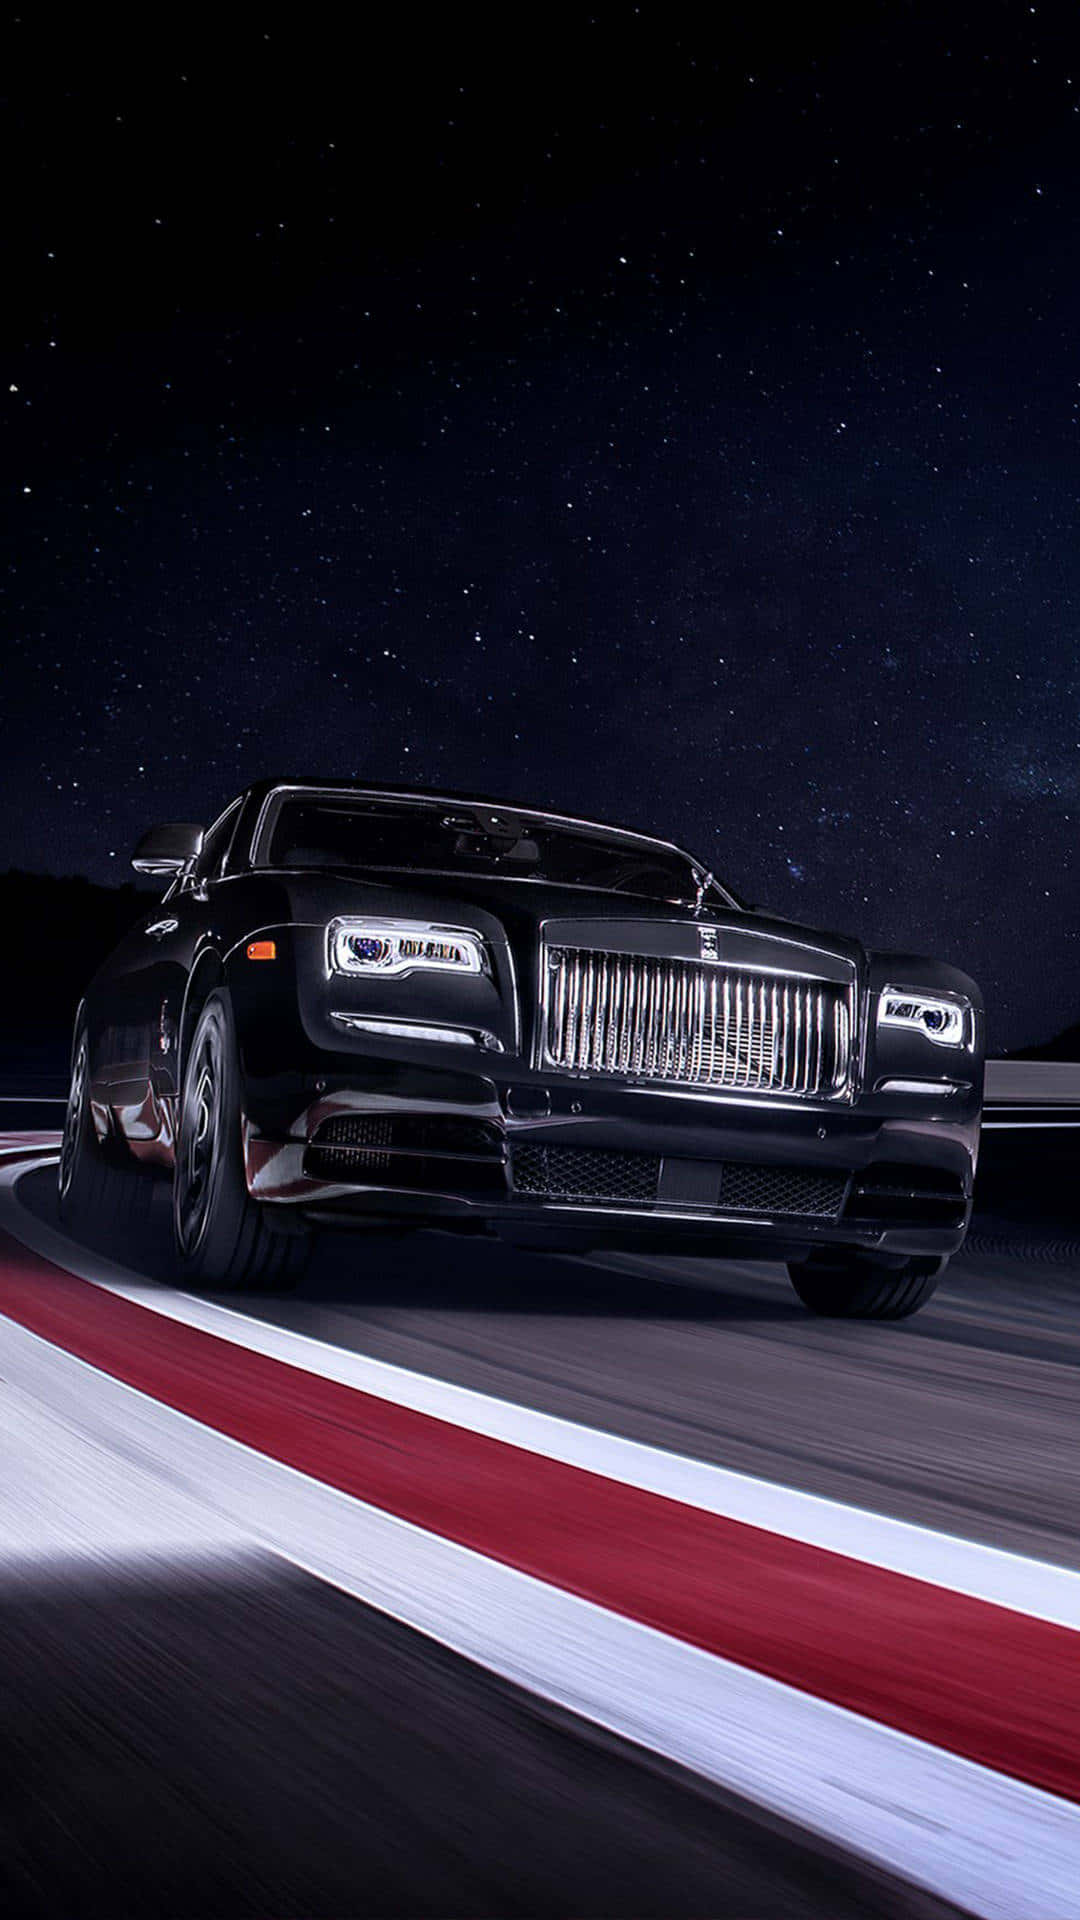 Caption: Majestic Elegance: The Timeless Luxury Of A Rolls Royce